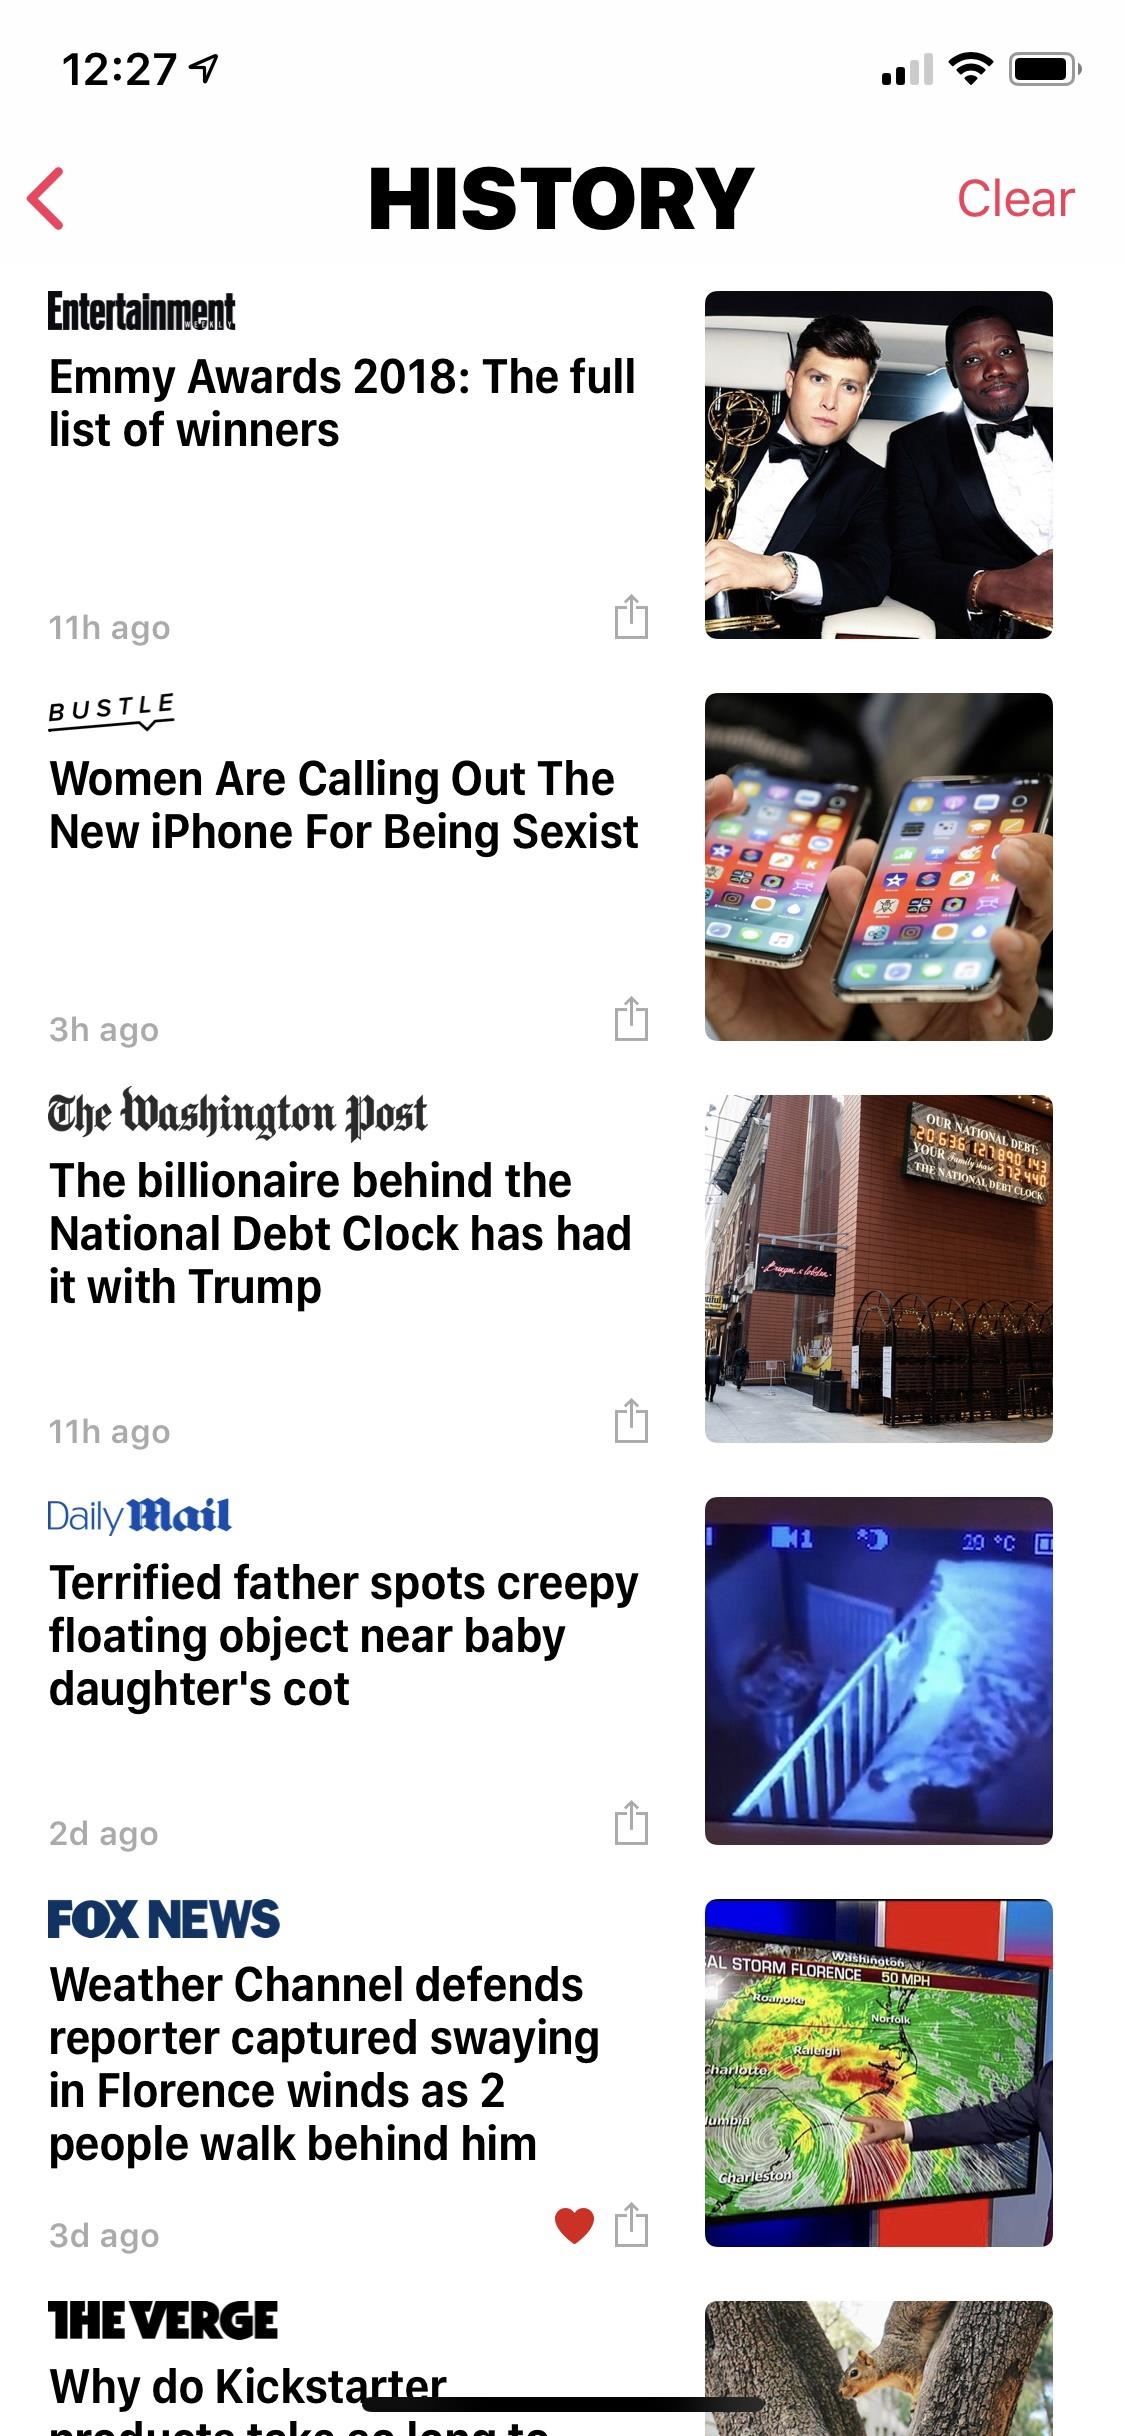 How to View Your Saved Apple News Stories & History in iOS 12 on Your iPhone